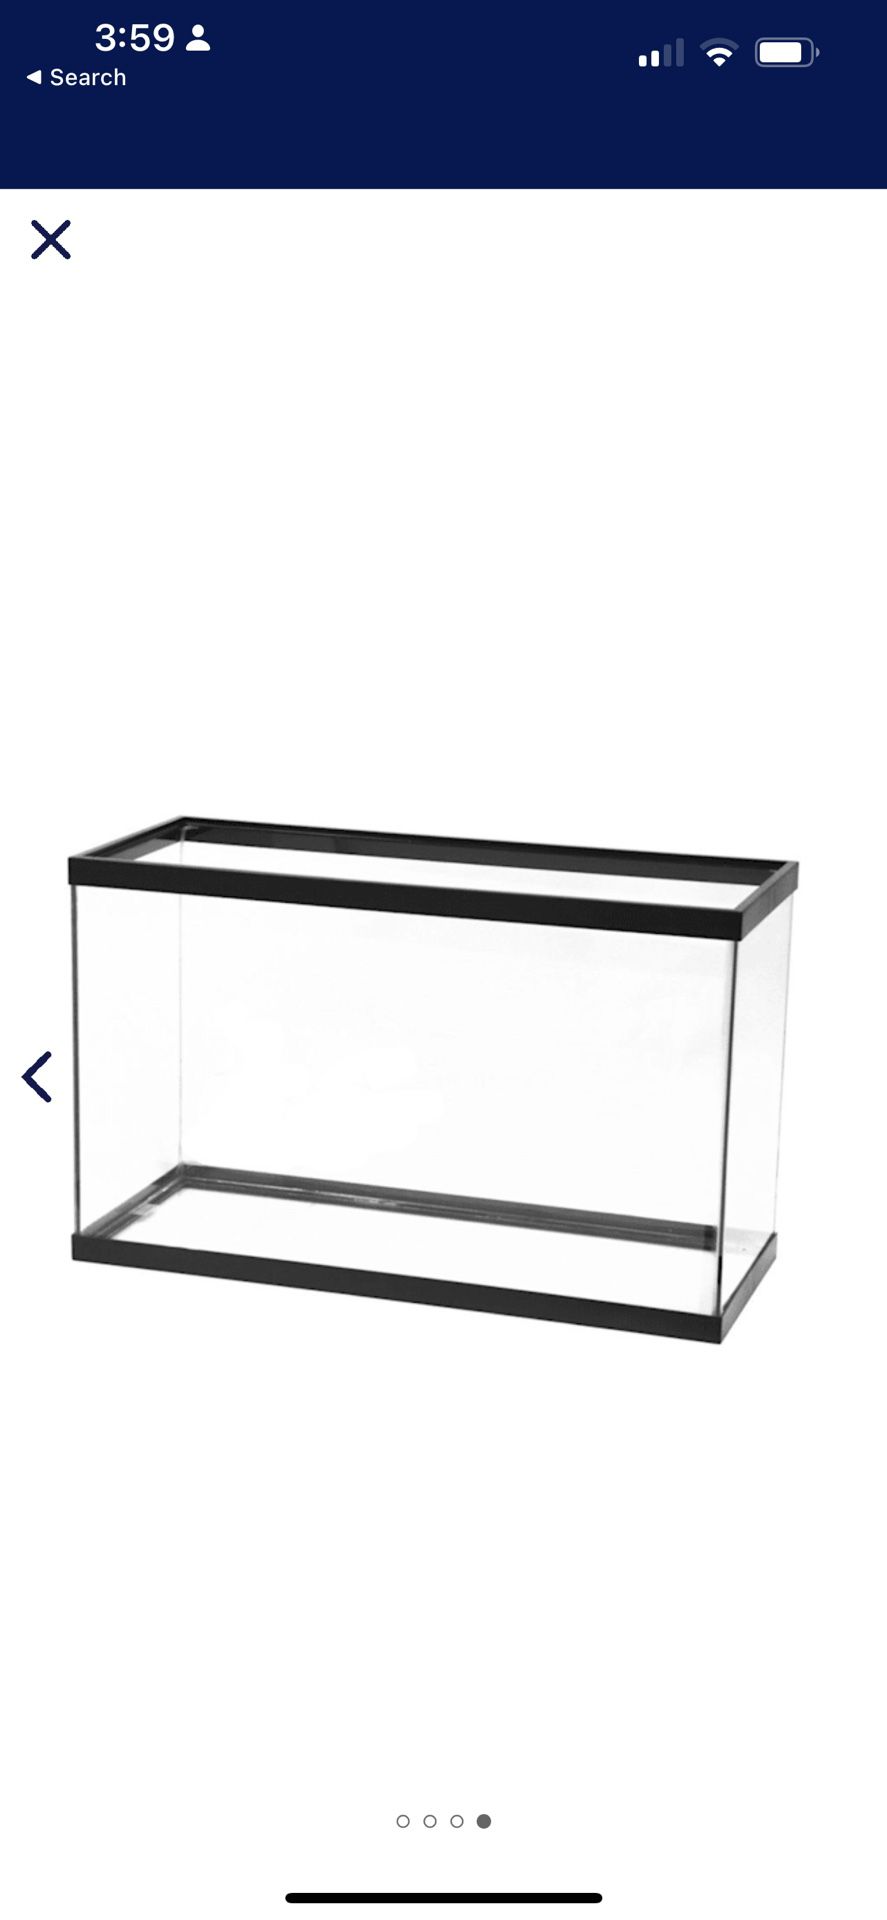 29 Gallon Fish Tank With Stand. 